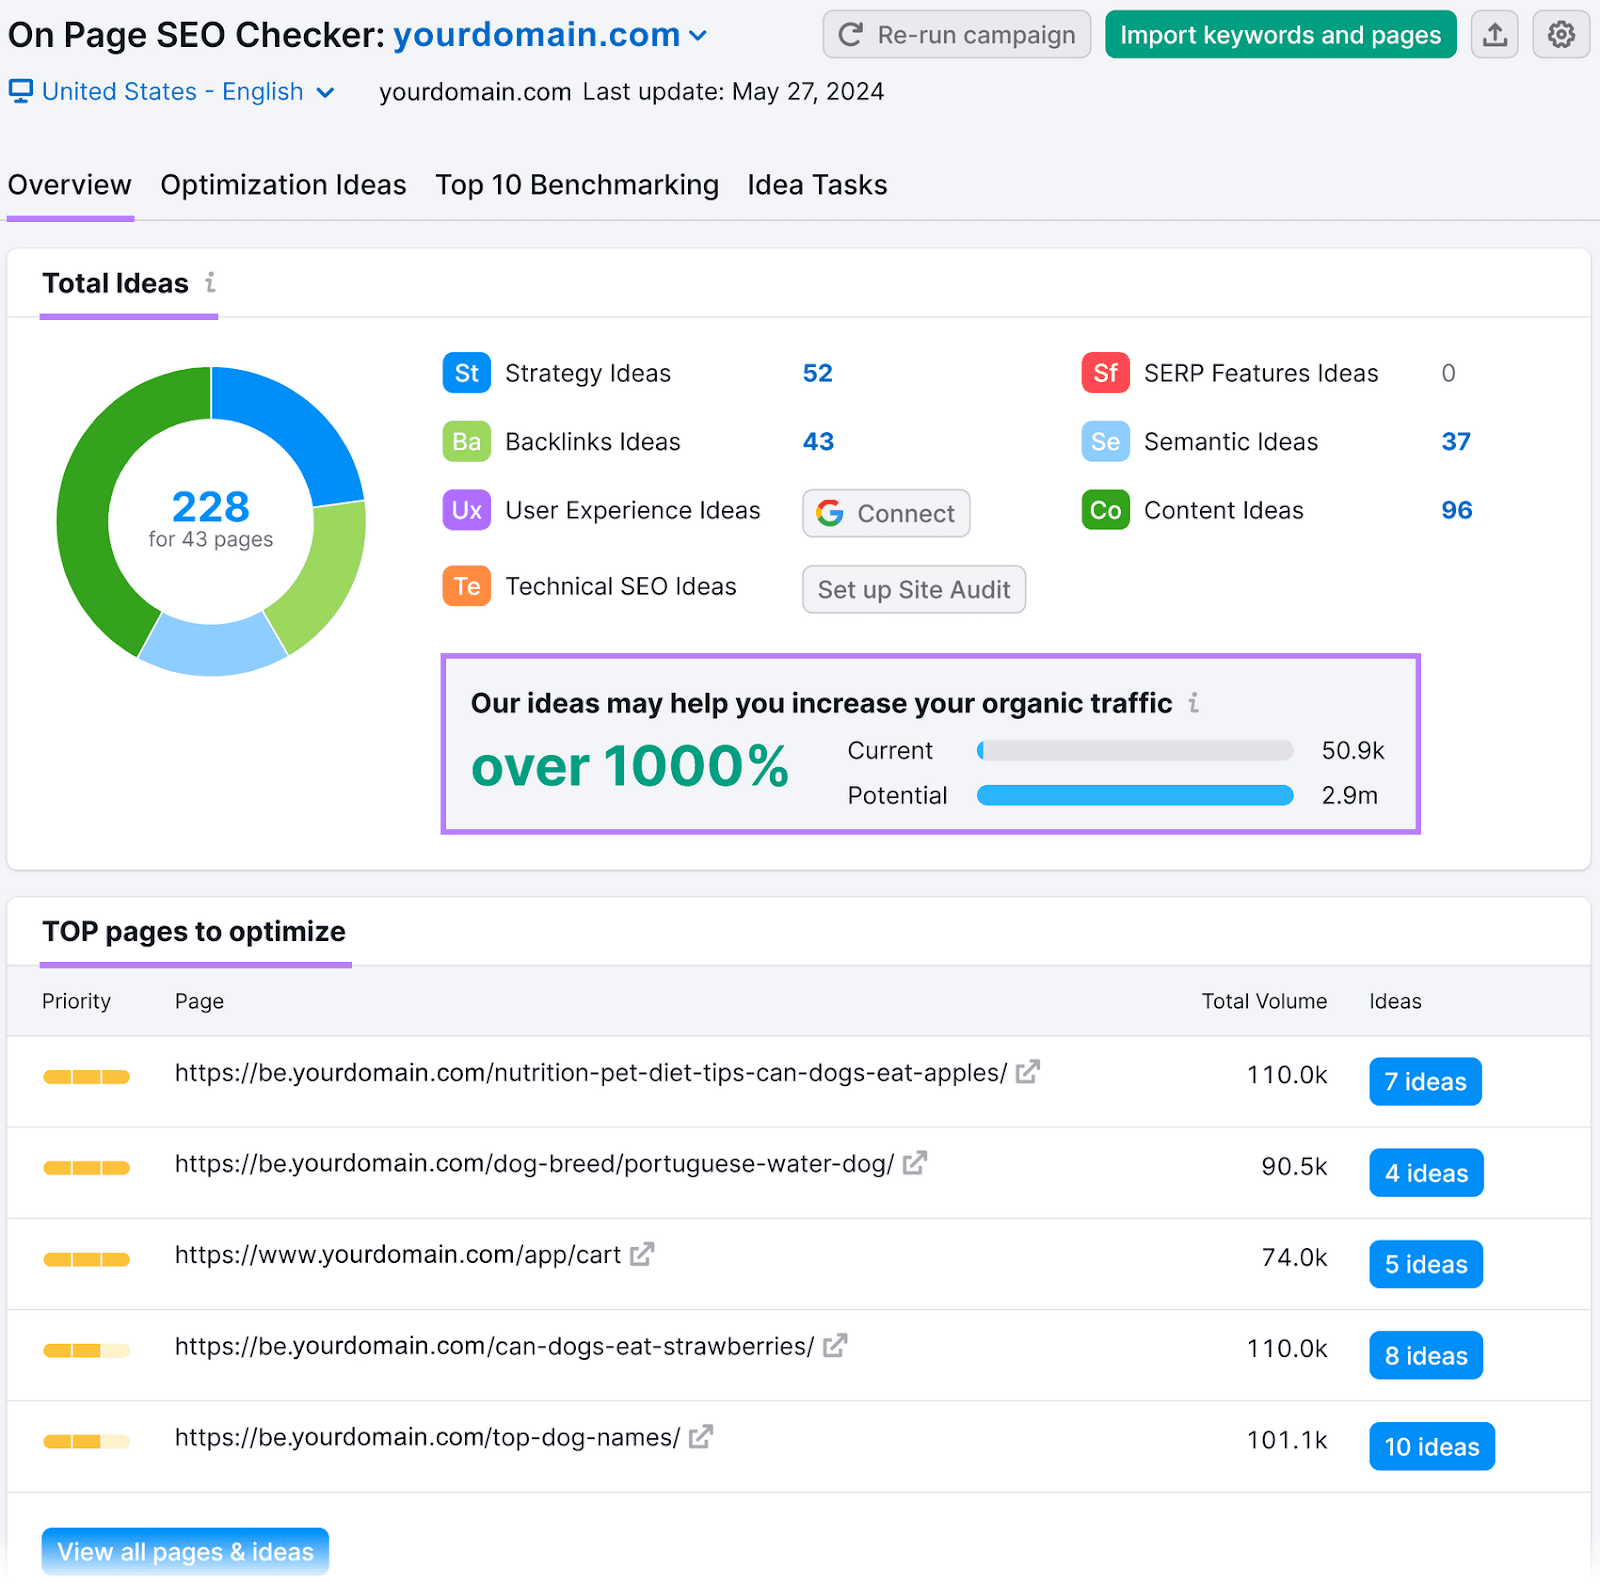 On Page SEO Checker showing a pie chart with total ideas and top pages to optimize with URLs and idea counts.